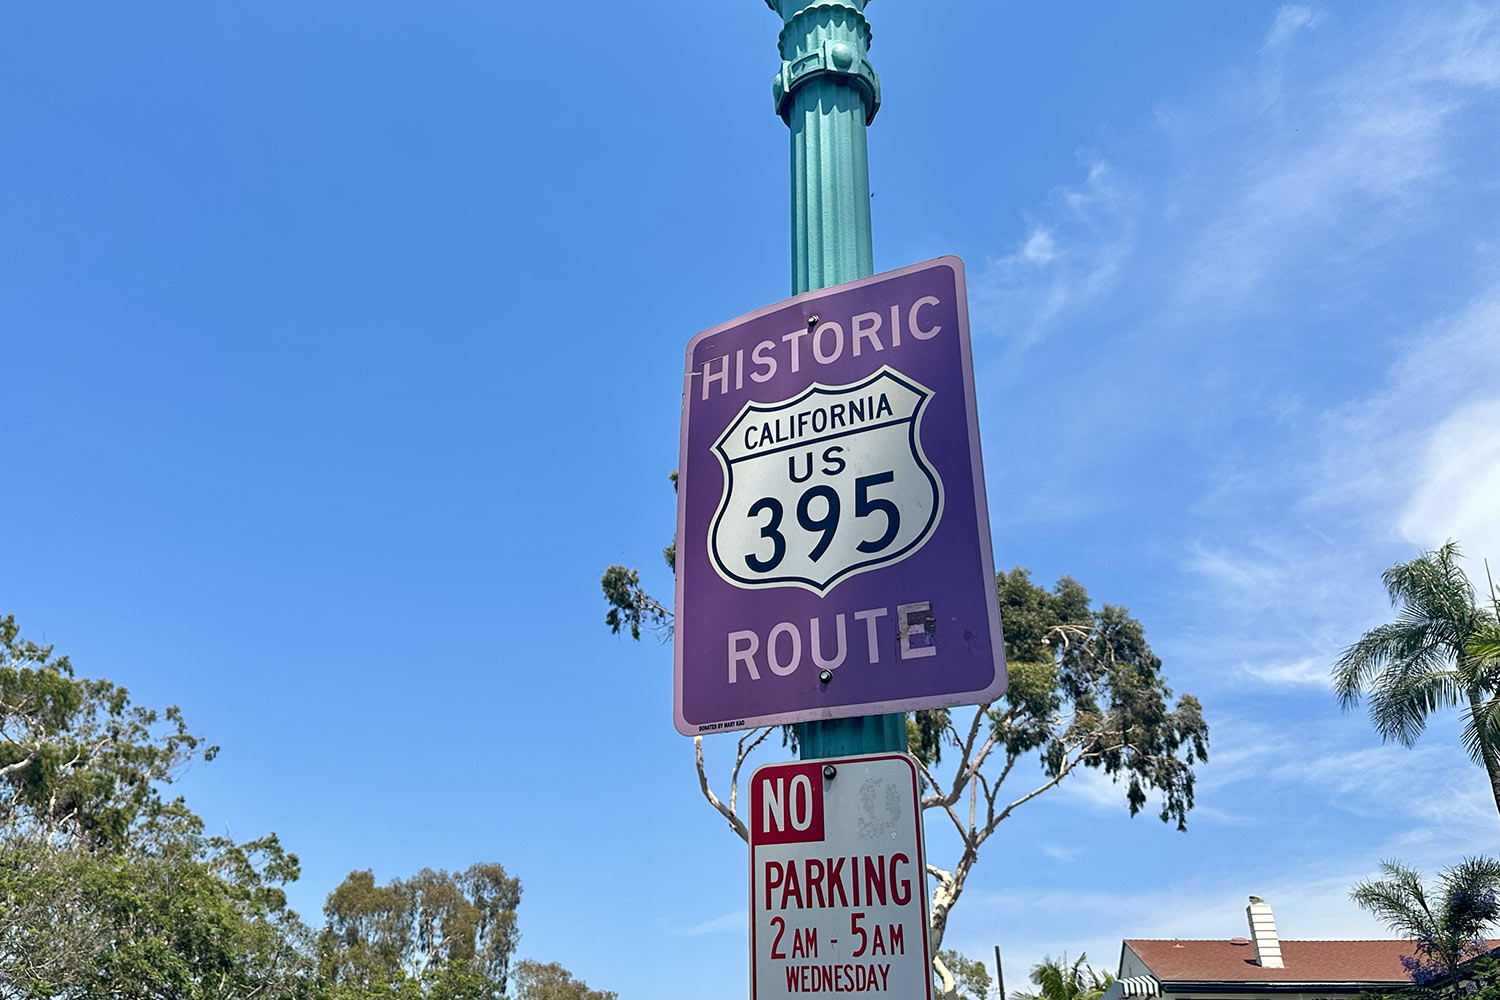 Route 365 in San Diego, California